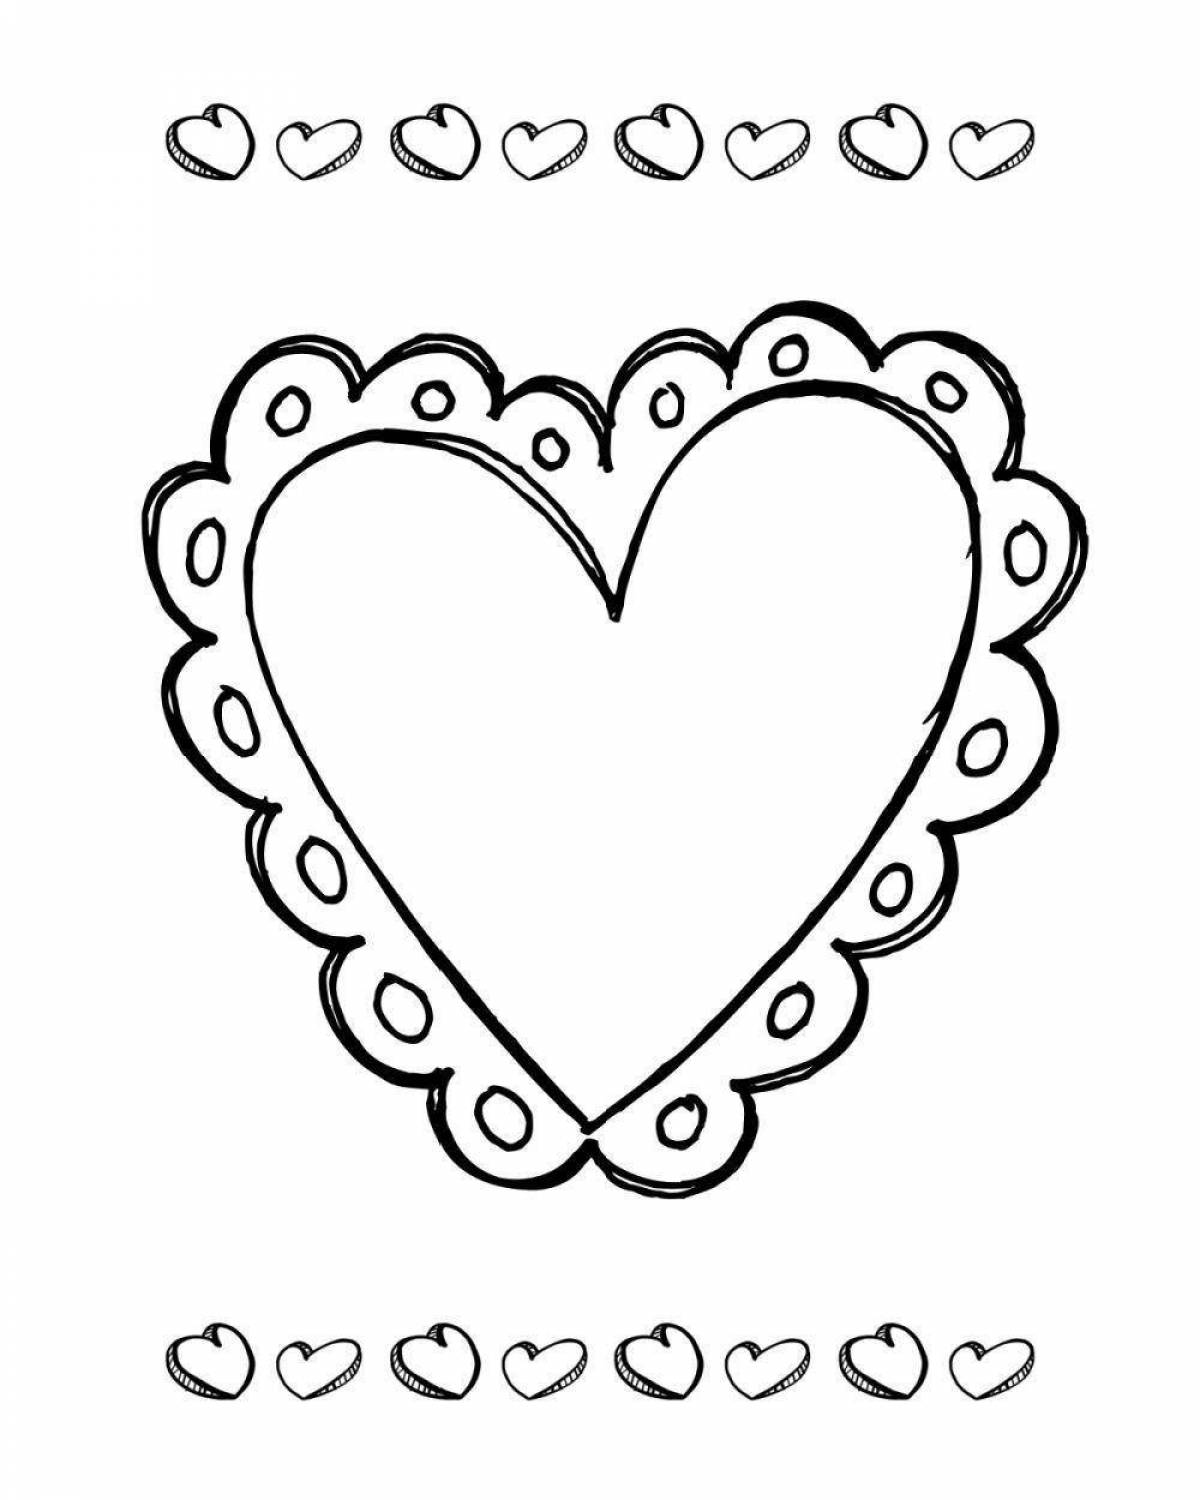 Coloring funny heart by numbers